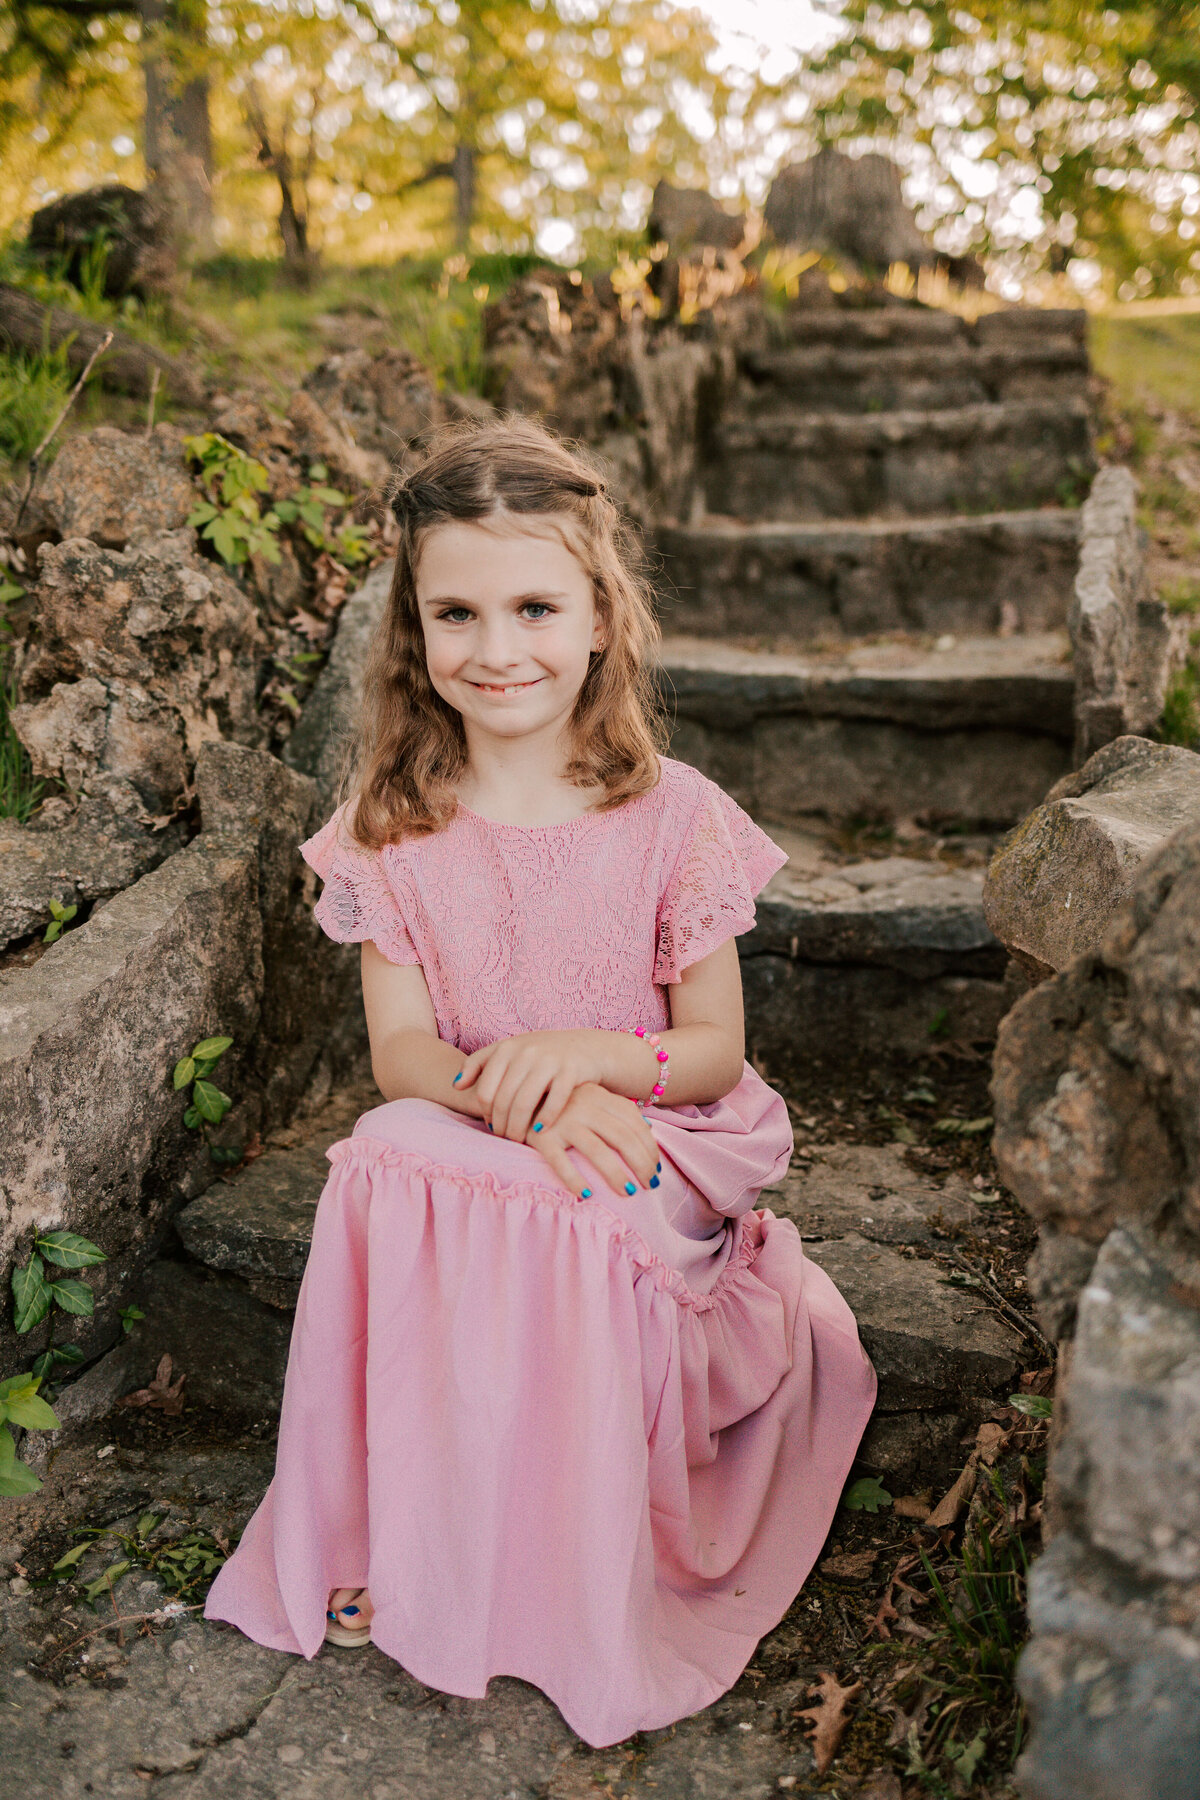 A beautiful girl wearing a long pink dress is sitting on stone steps in a St. Louis park at sunset.